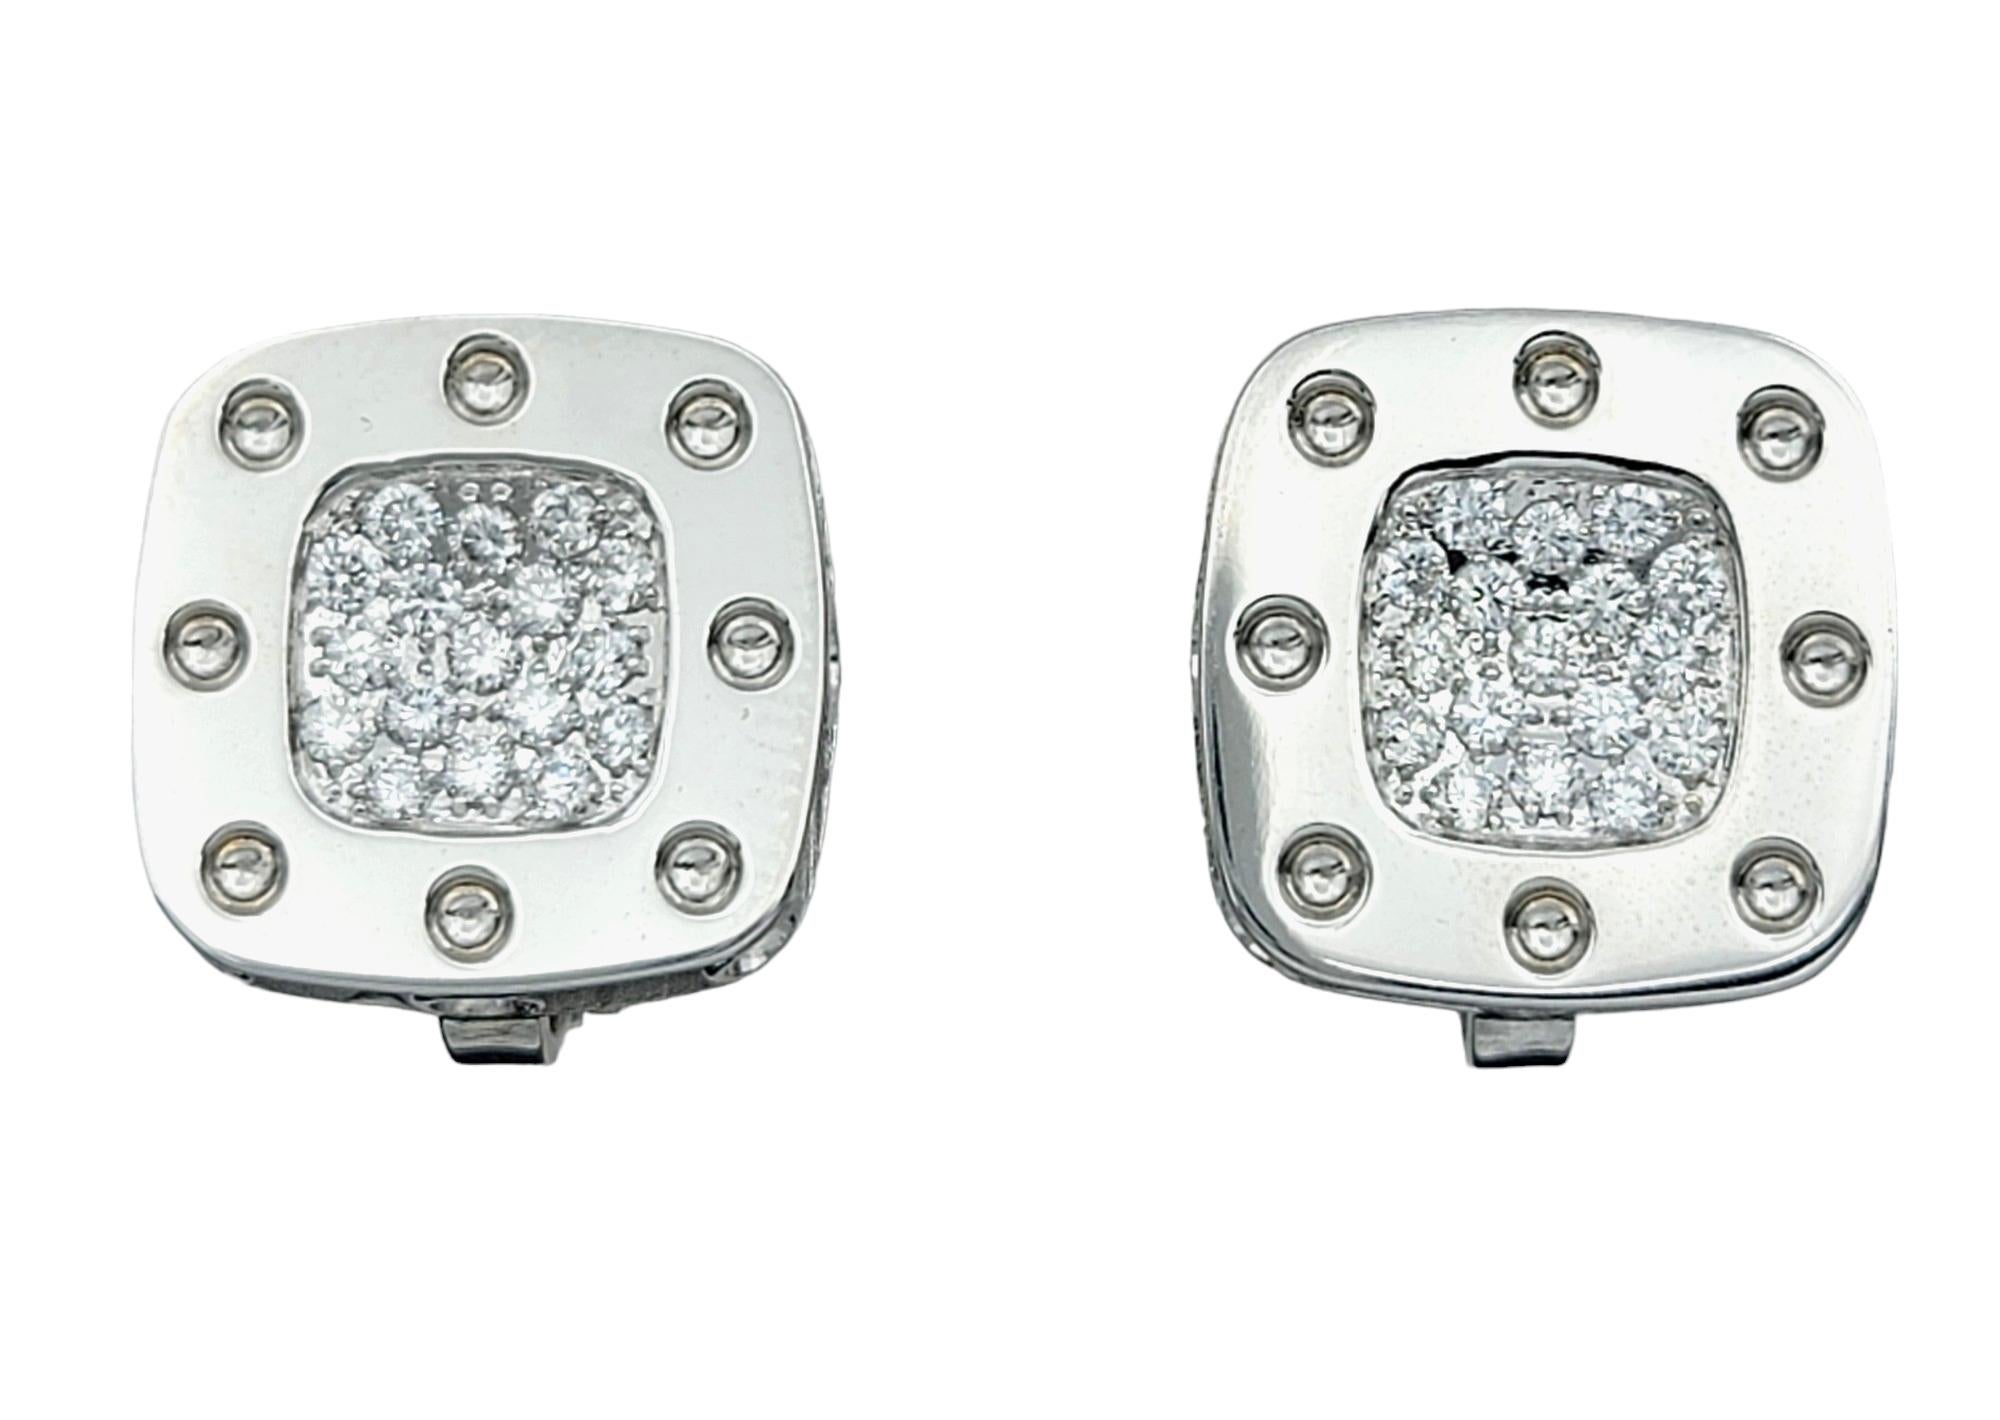 These Roberto Coin Pois Moi diamond omega back earrings are a dazzling addition to any jewelry collection. Crafted in 18 karat white gold, they feature the signature Pois Moi design, characterized by square indentations reminiscent of a playful